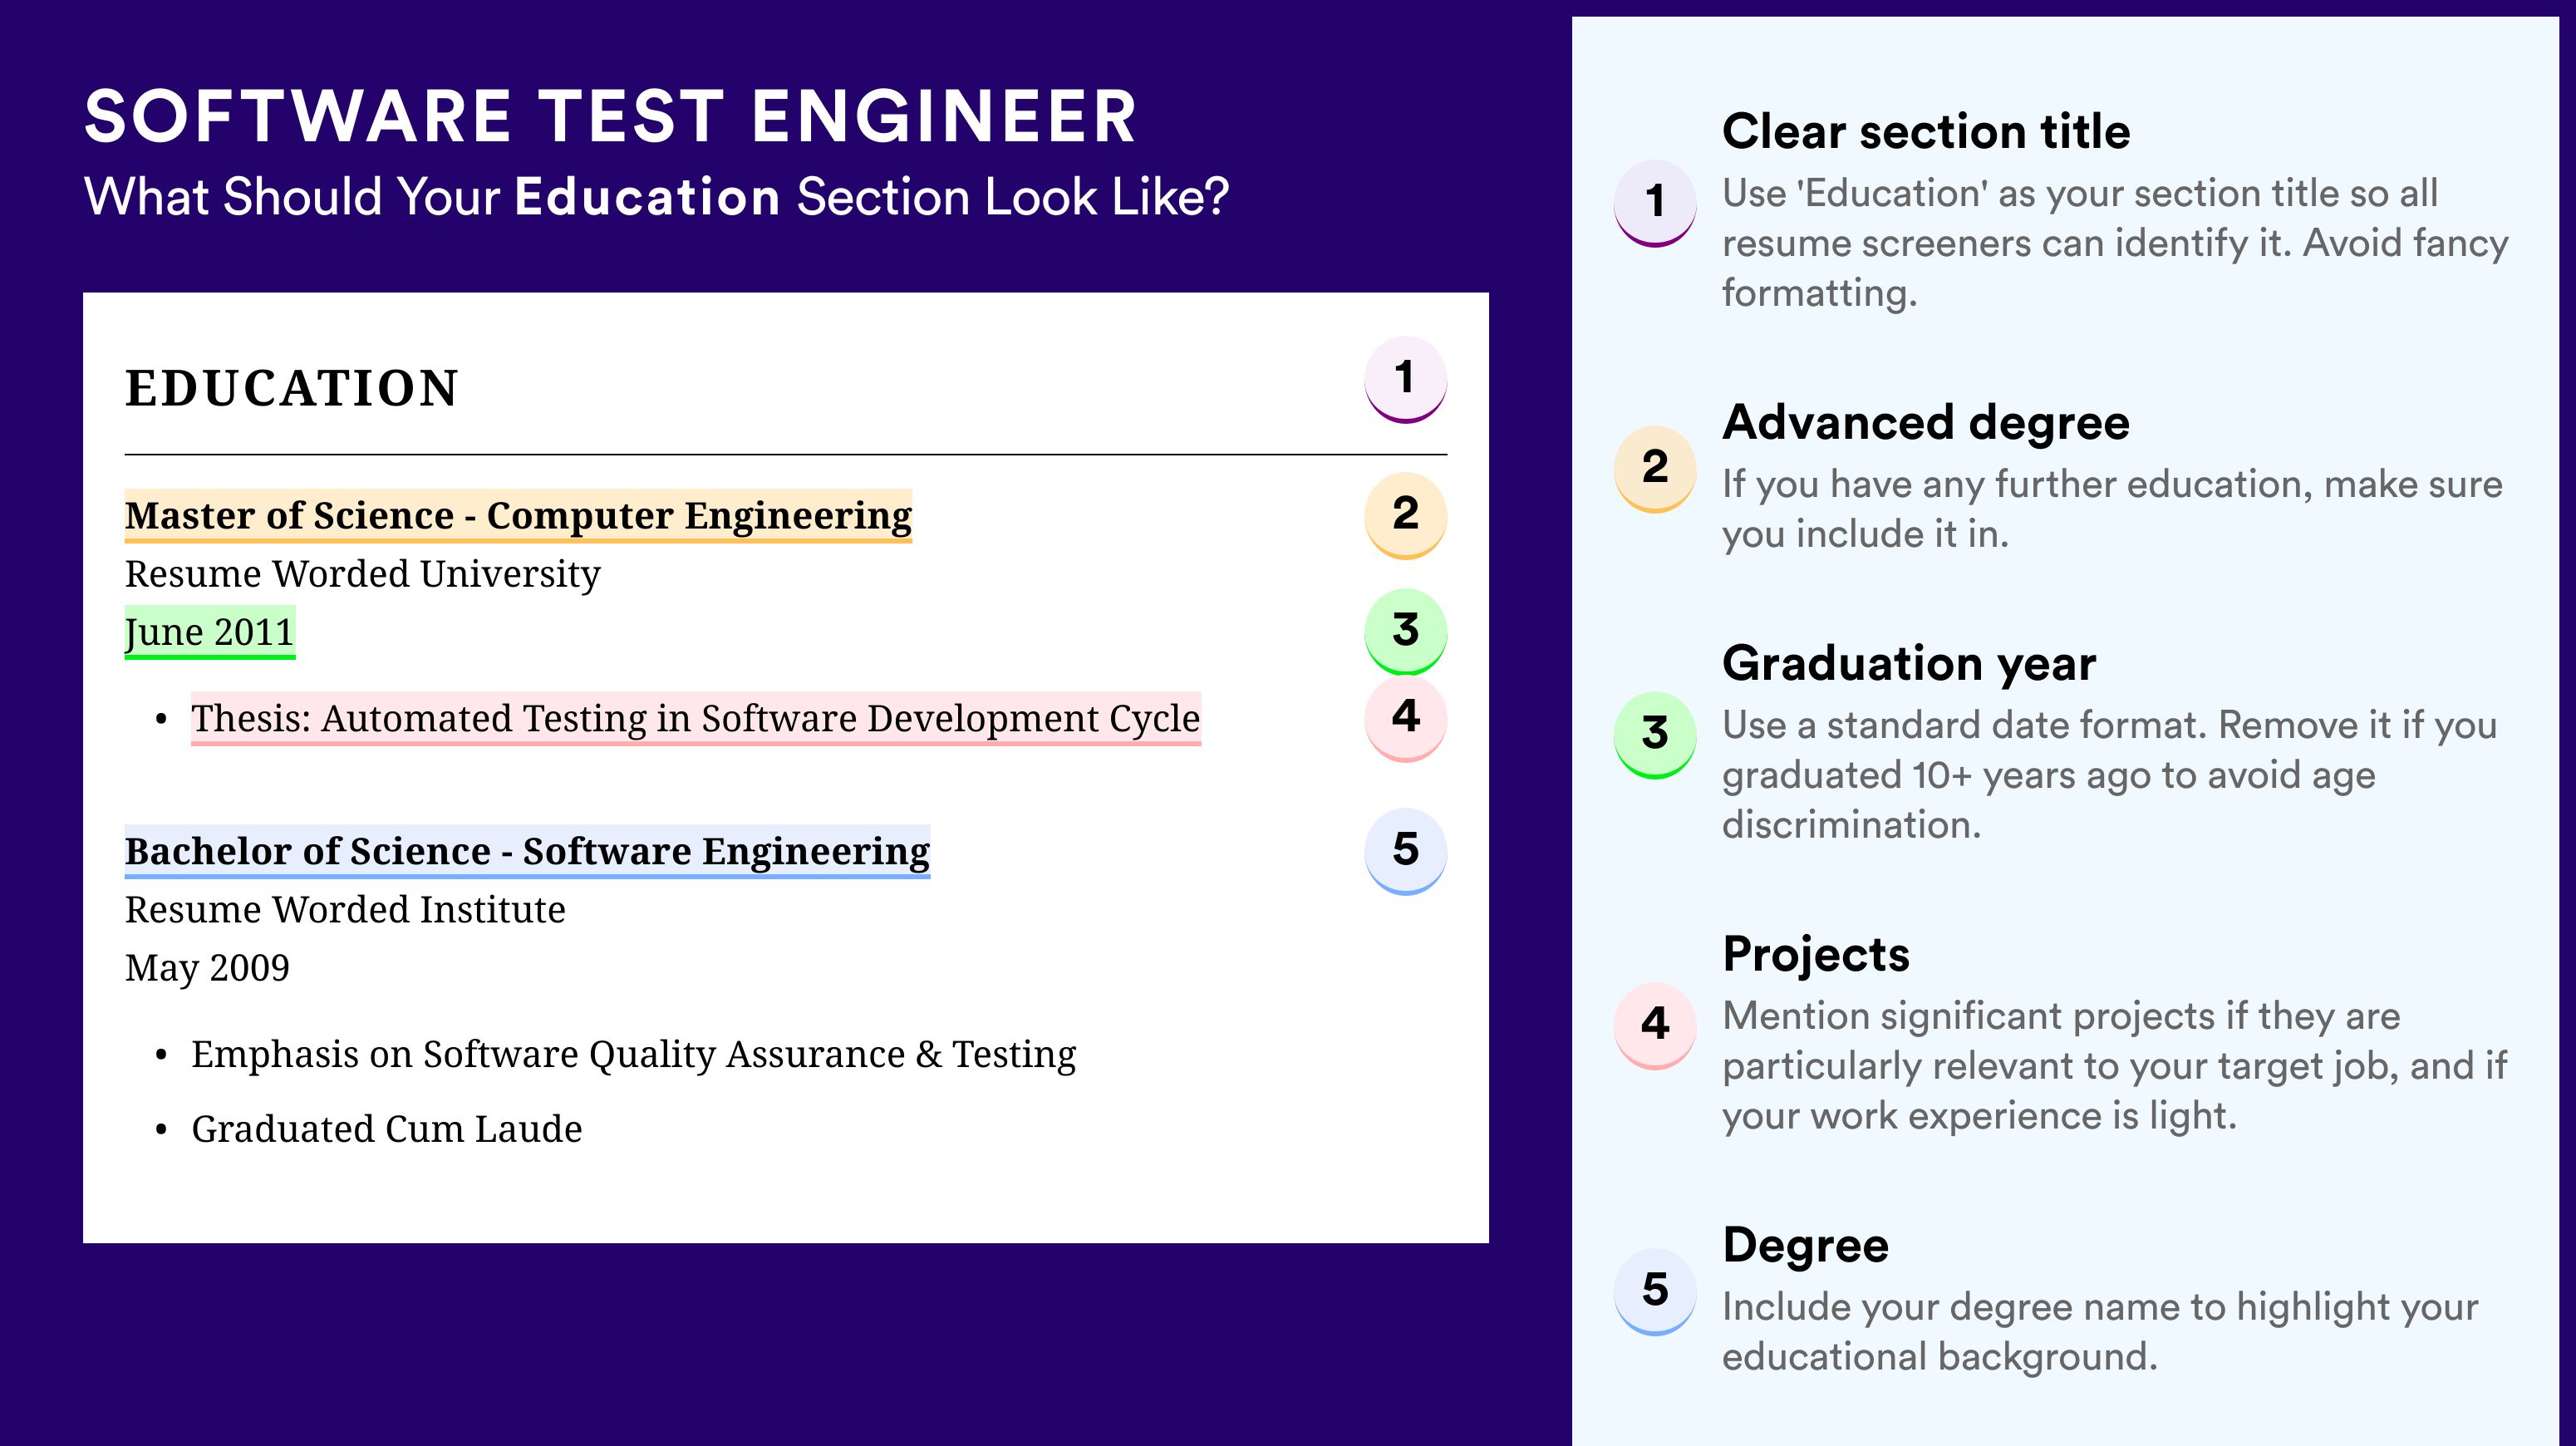 How To Write An Education Section - Software Test Engineer Roles